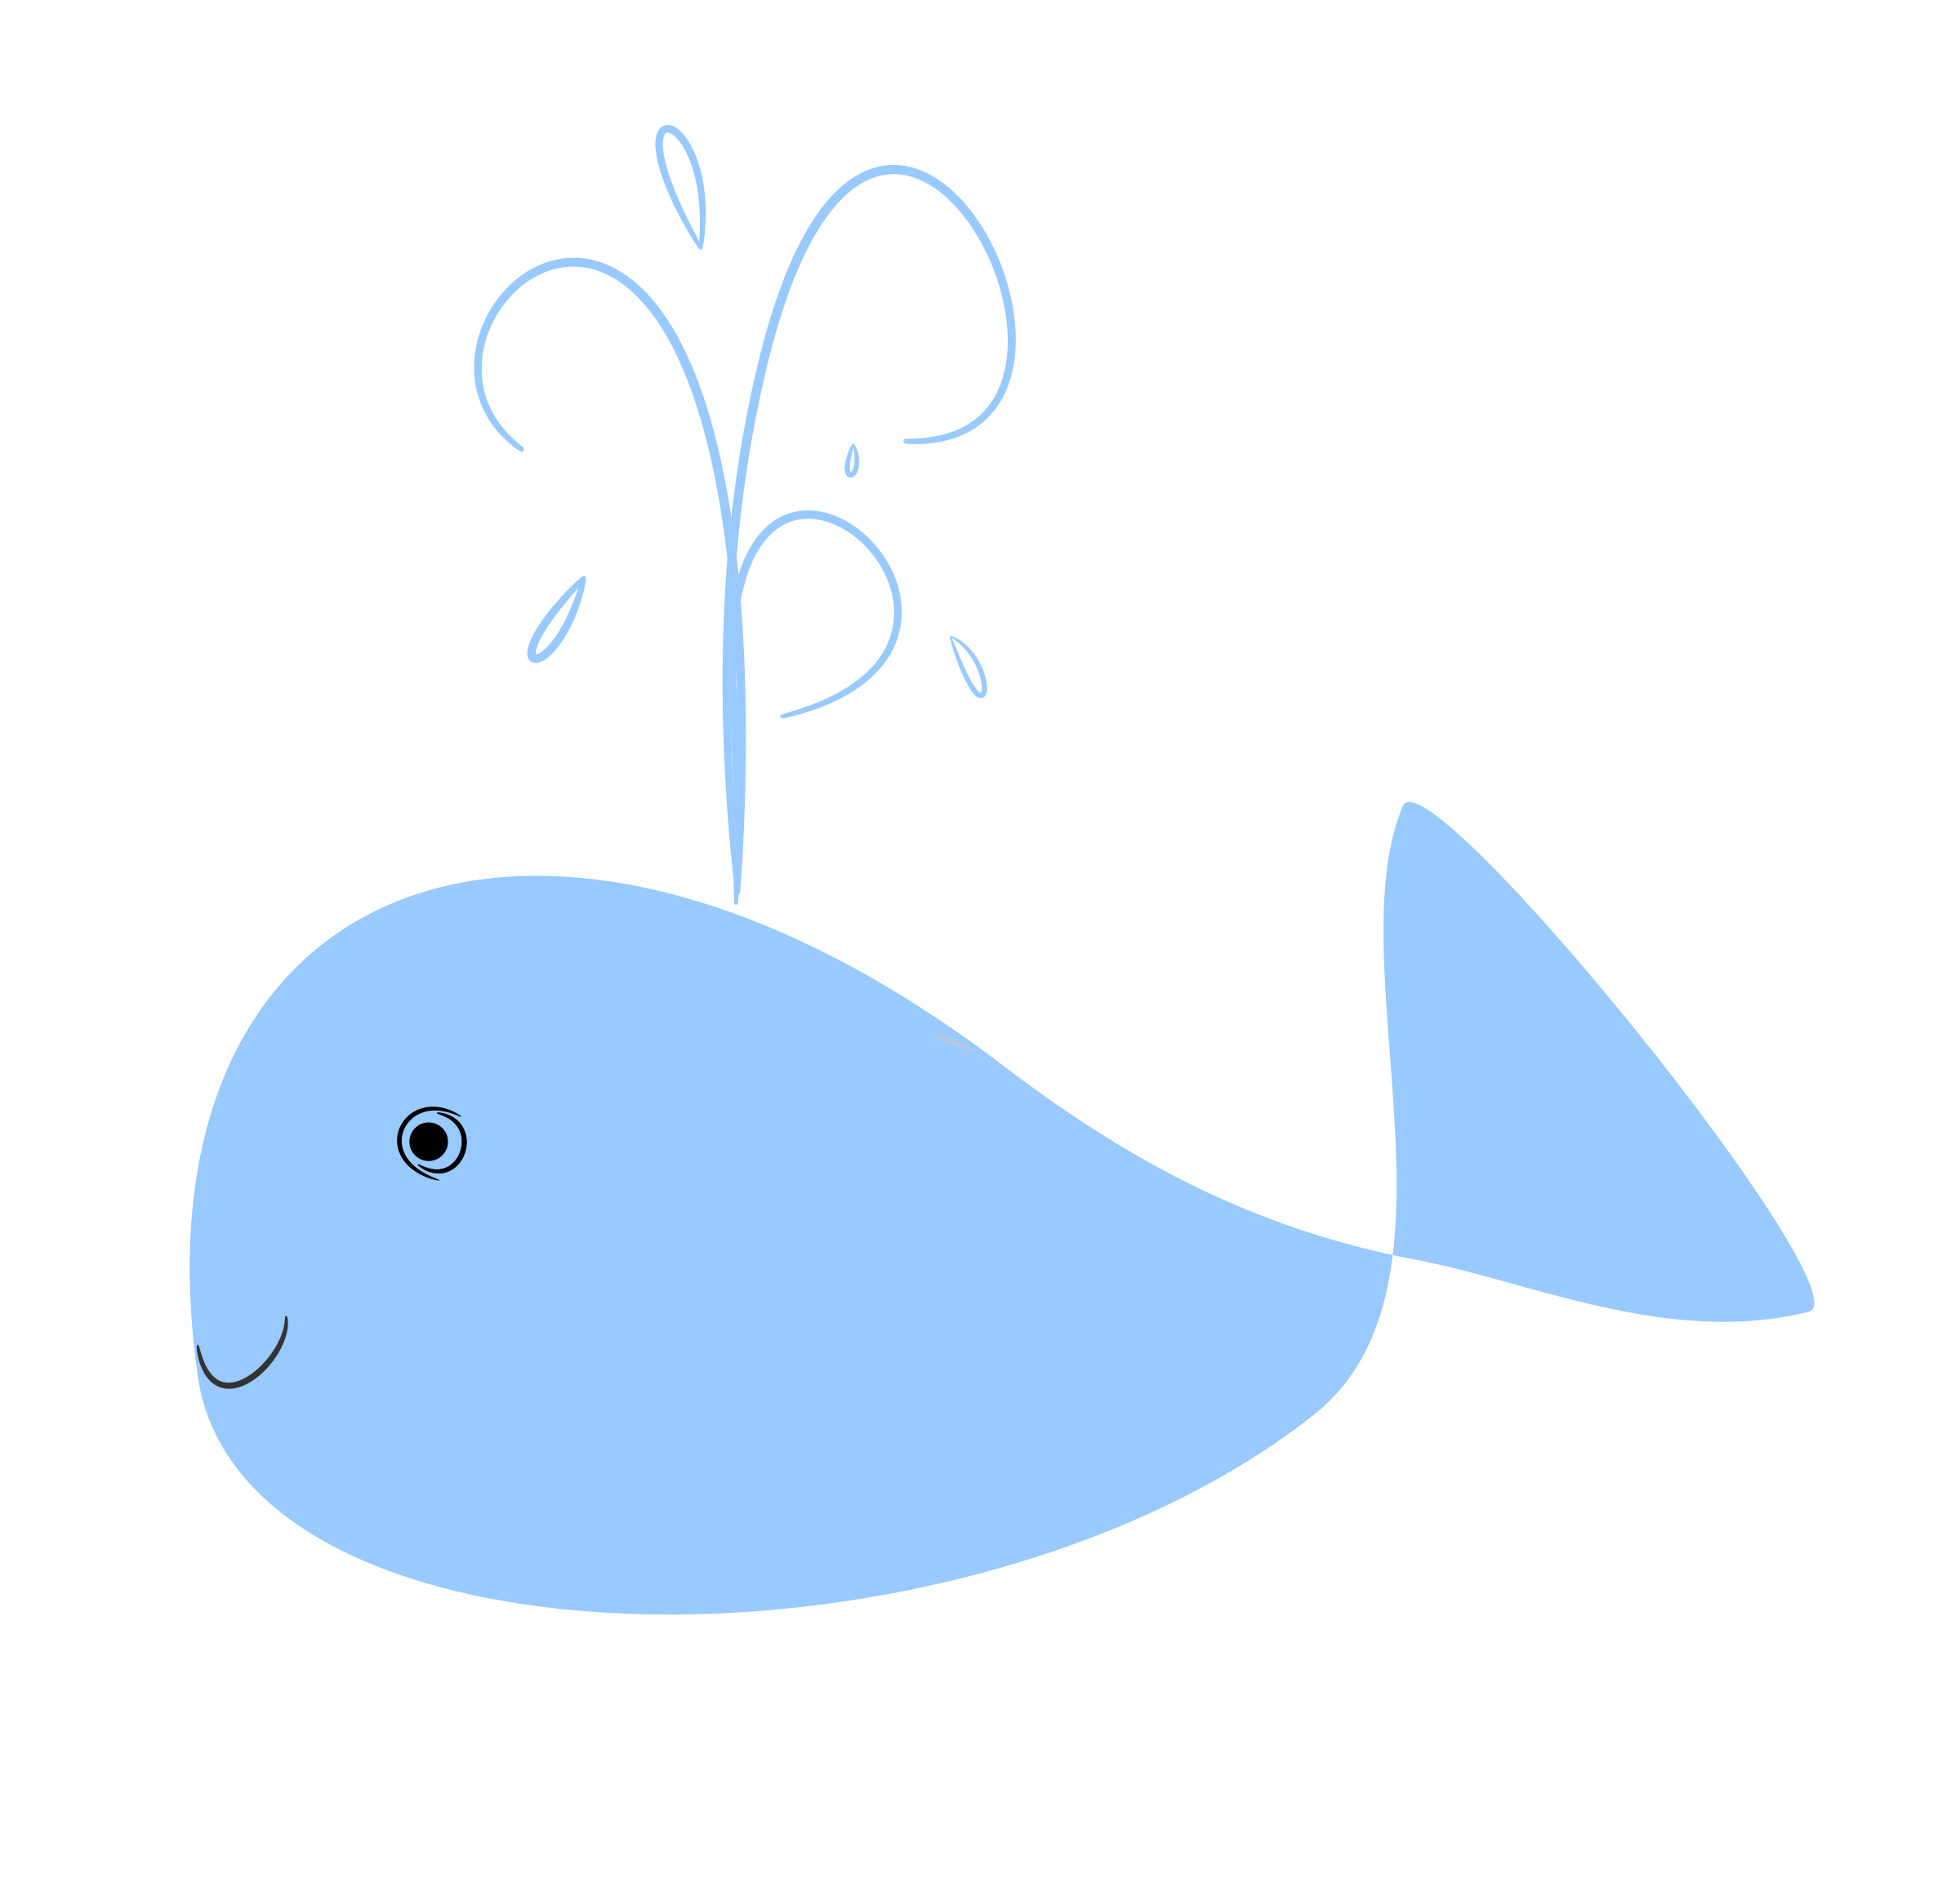 Big image png. Water clipart whale